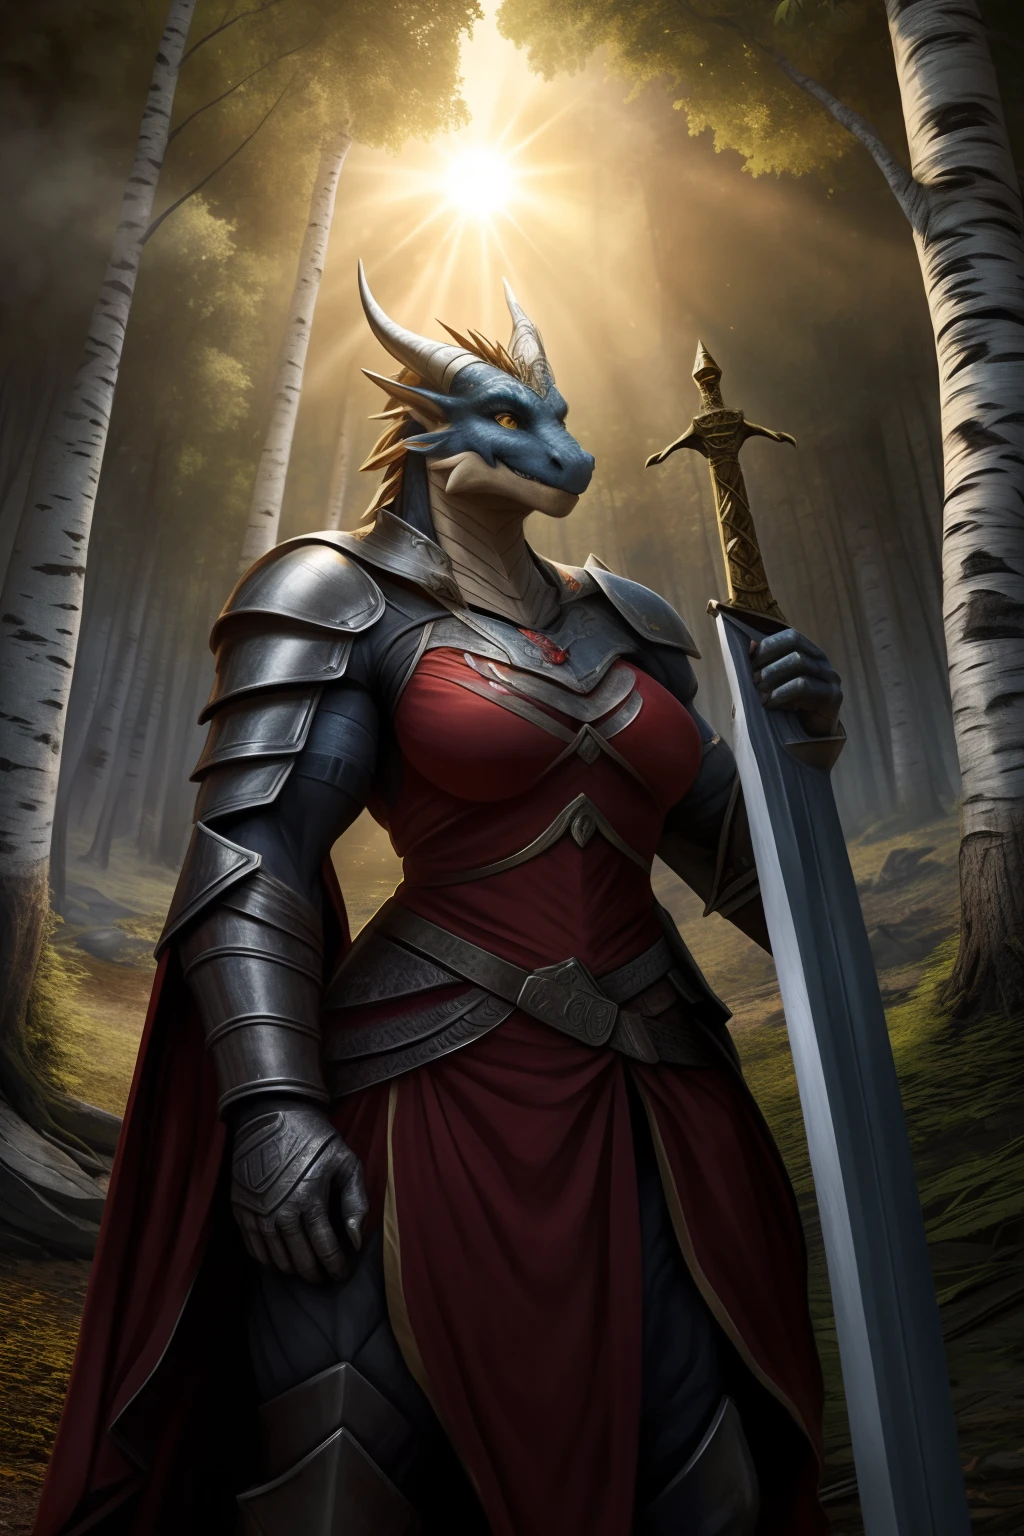 ((Anthro Dragon, The woman, Strong warrior, large muscular body, A big sword in your hands, armor dress) (background  Russian Forest, Birch, Sun light)) in full height